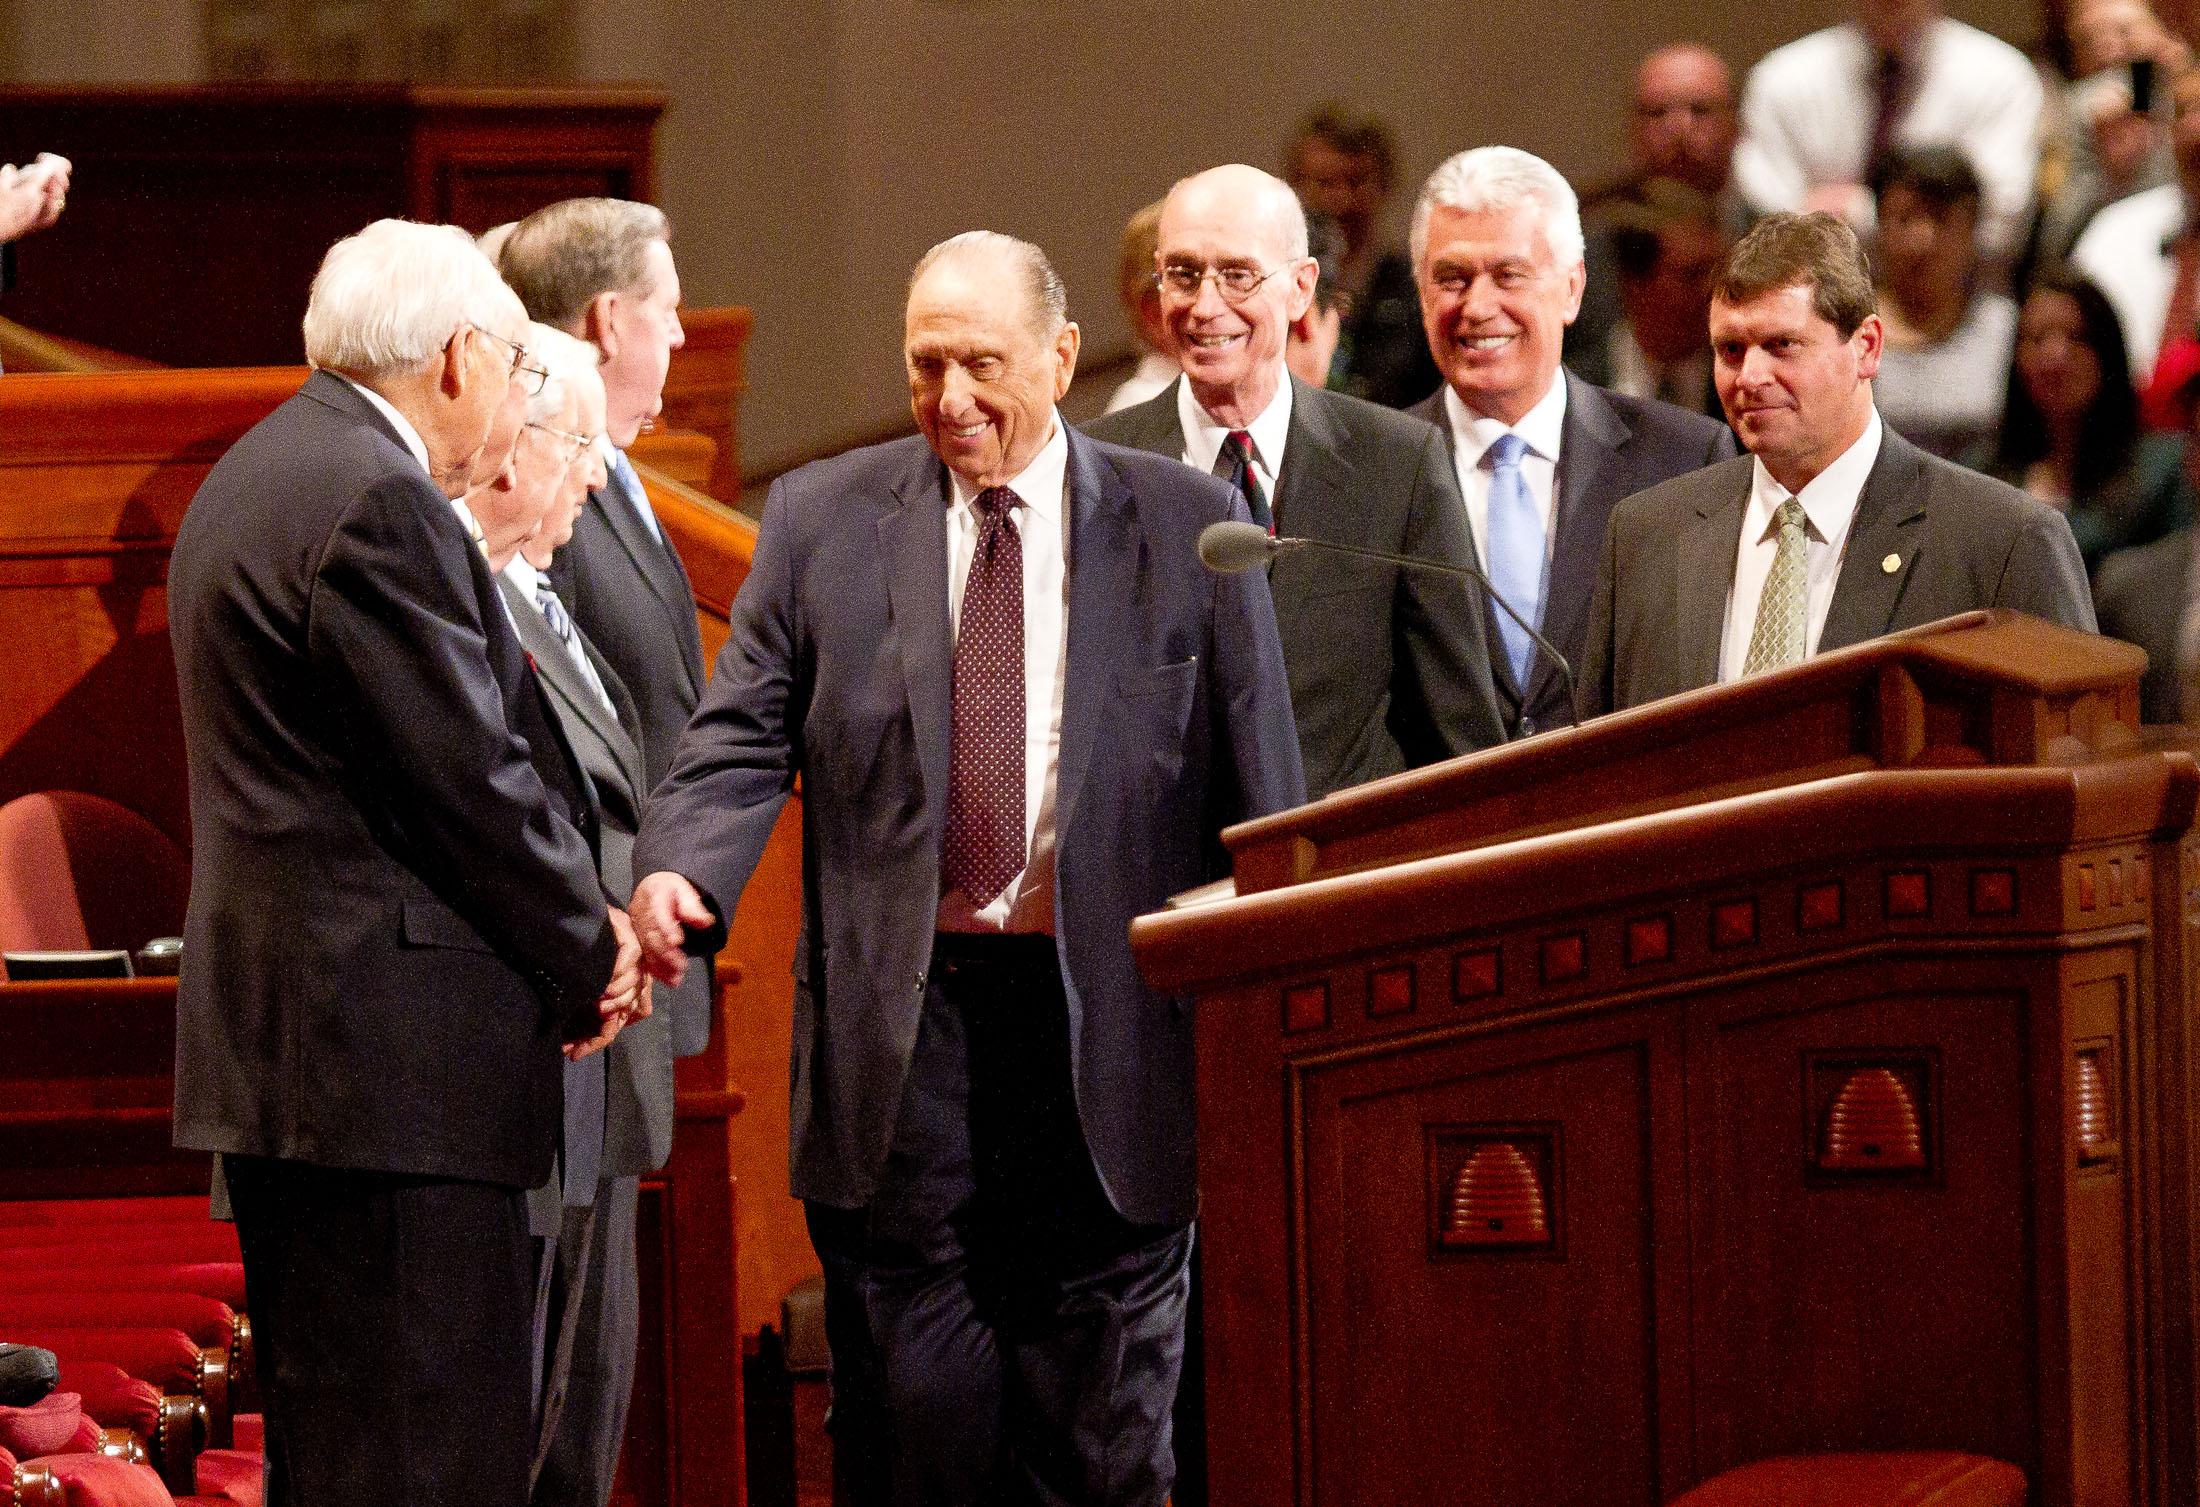 General Conference offers doctrinal constancy amid change The Daily